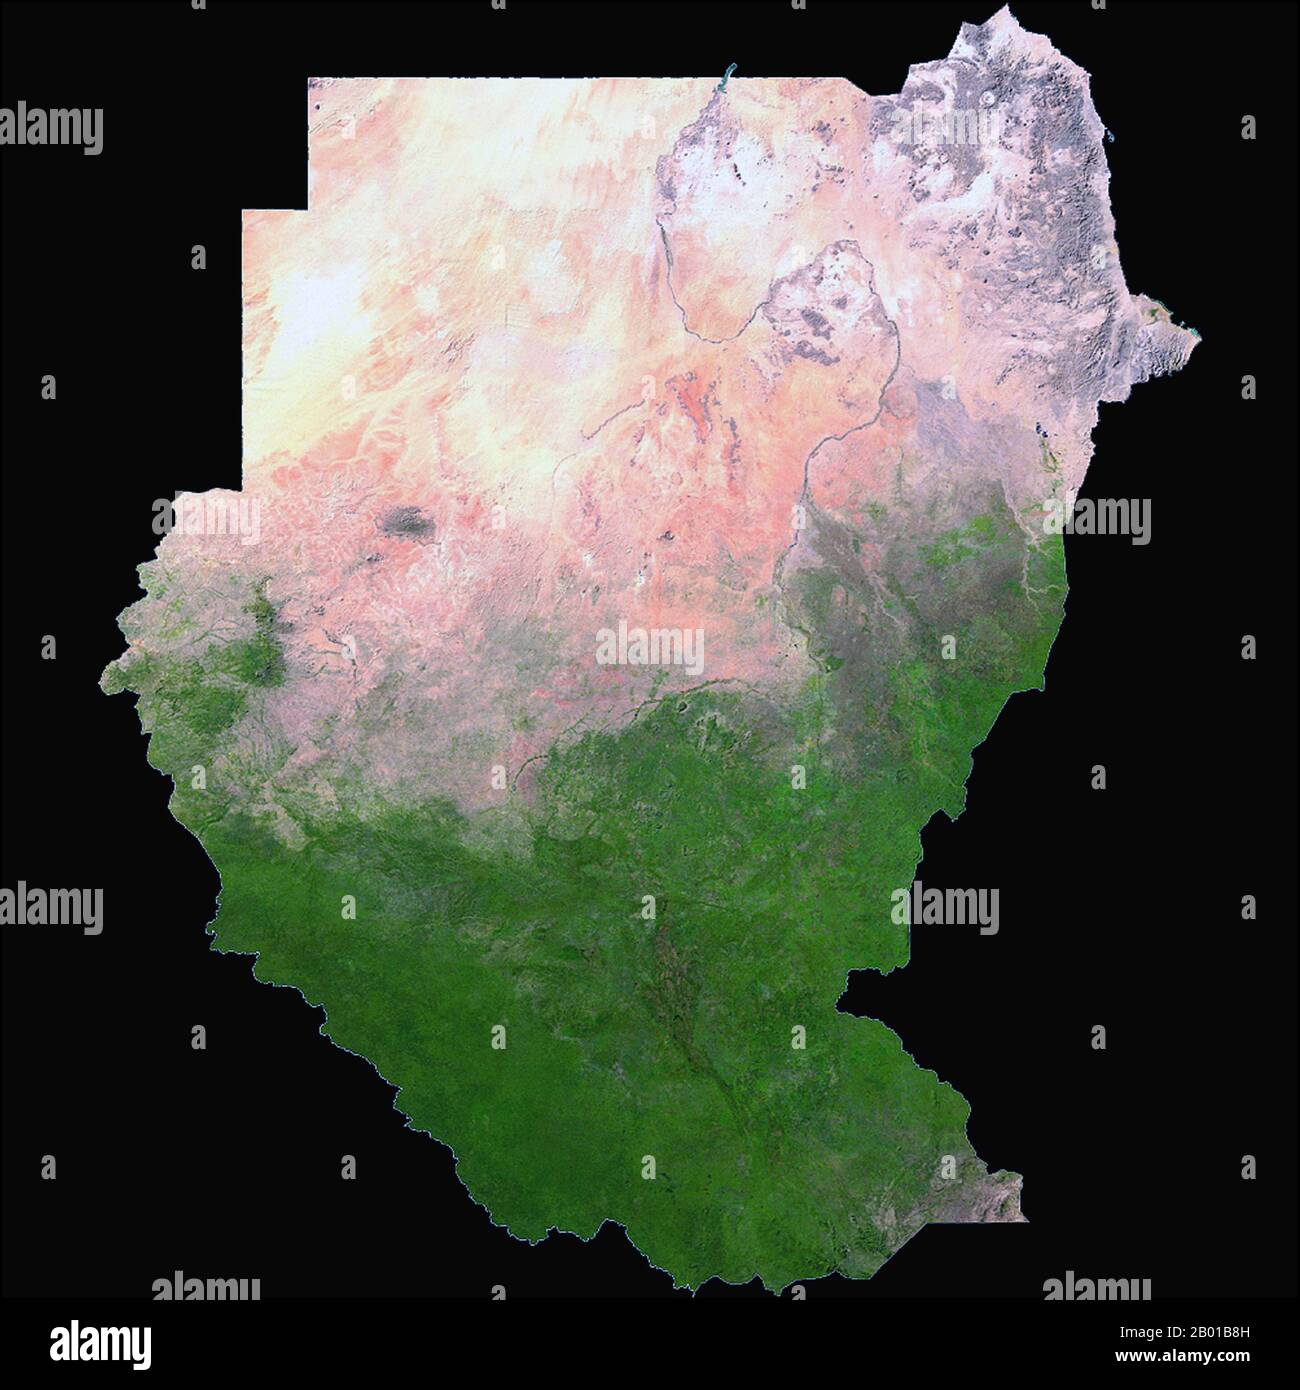 Sudan/South Sudan: A NASA satellite image of Sudan and South Sudan, 2006.  The Republic of Sudan (Arabic: Jumhūrīyat al Sūdān), is a country in North Africa. It is bordered by Egypt to the north, the Red Sea to the northeast, Eritrea and Ethiopia to the east, Southern Sudan to the south, Central African Republic to the southwest, Chad to the west and Libya to the northwest. The world's longest river, the Nile, divides the country between east and west sides.  Southern Sudan (Arabic:Janūb as-Sūdān) is a landlocked independent country with Juba as its capital city. Stock Photo